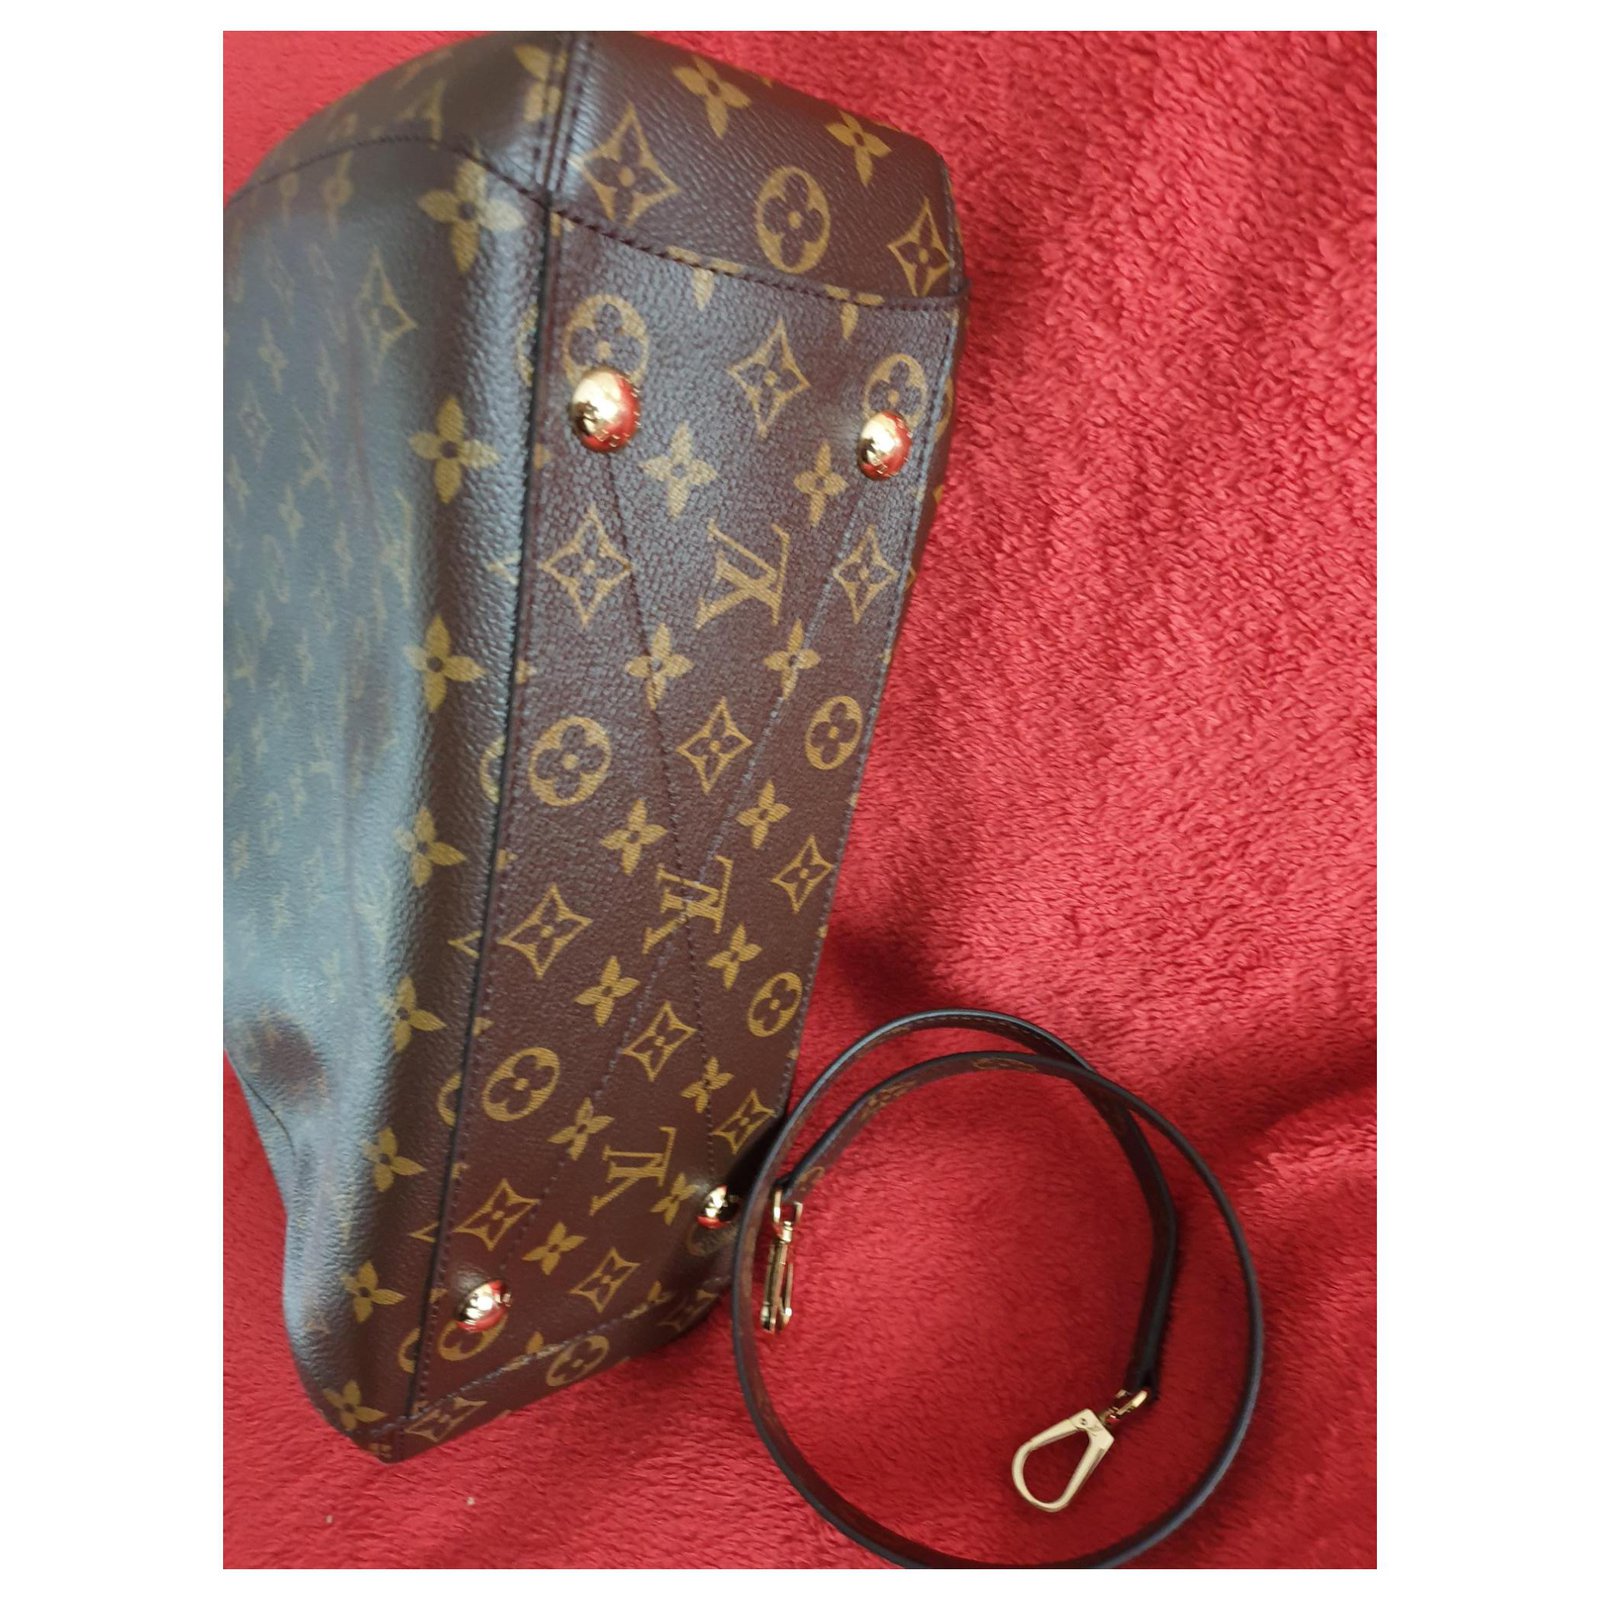 Louis Vuitton Montaigne MM with receipt, almost new. Brown Cloth